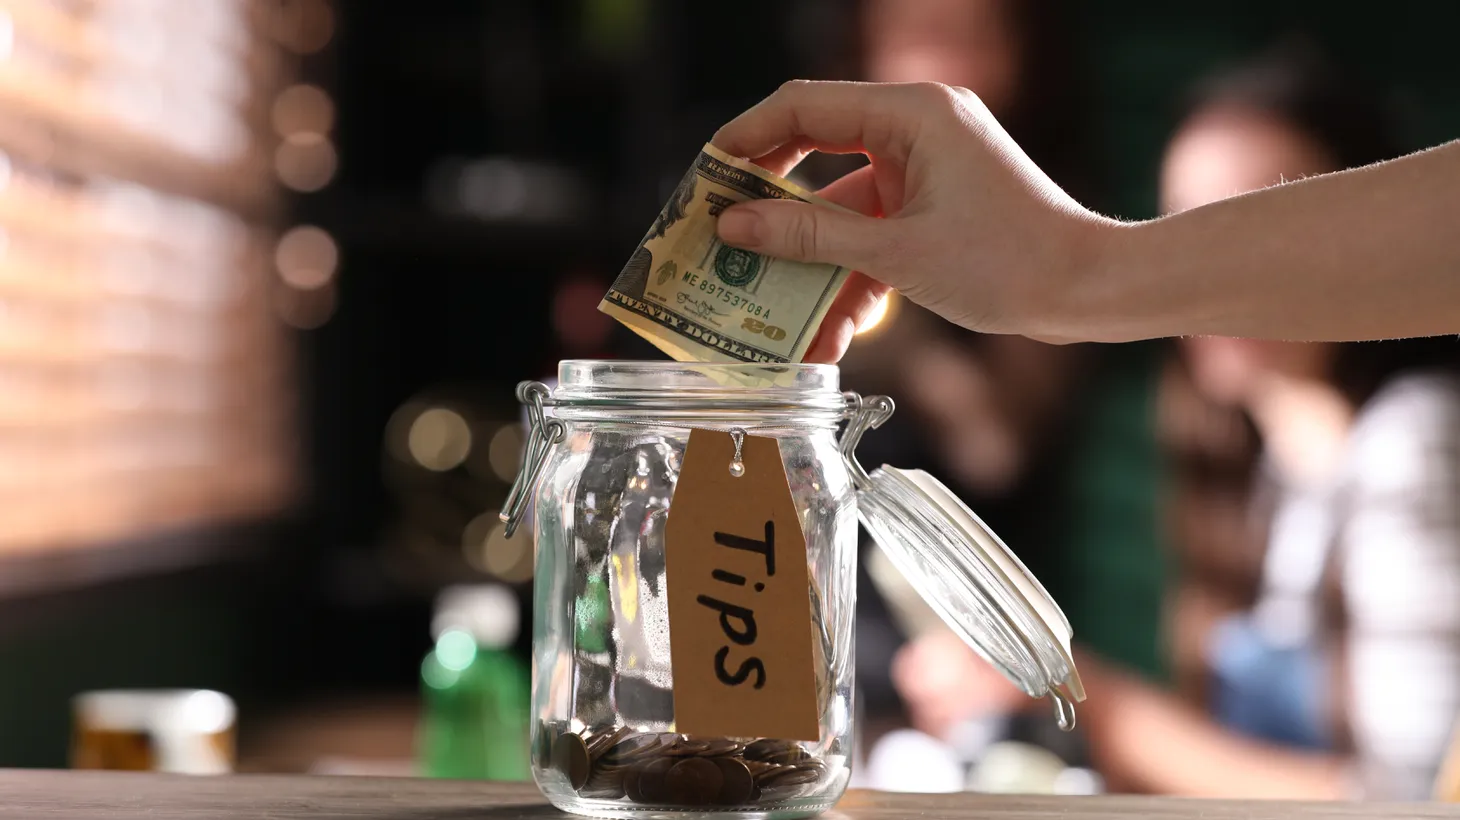 The tip jar looks quaint in light of a glaring tablet with a suggested percentage to leave. But in this age of technology, who should we tip and how much?